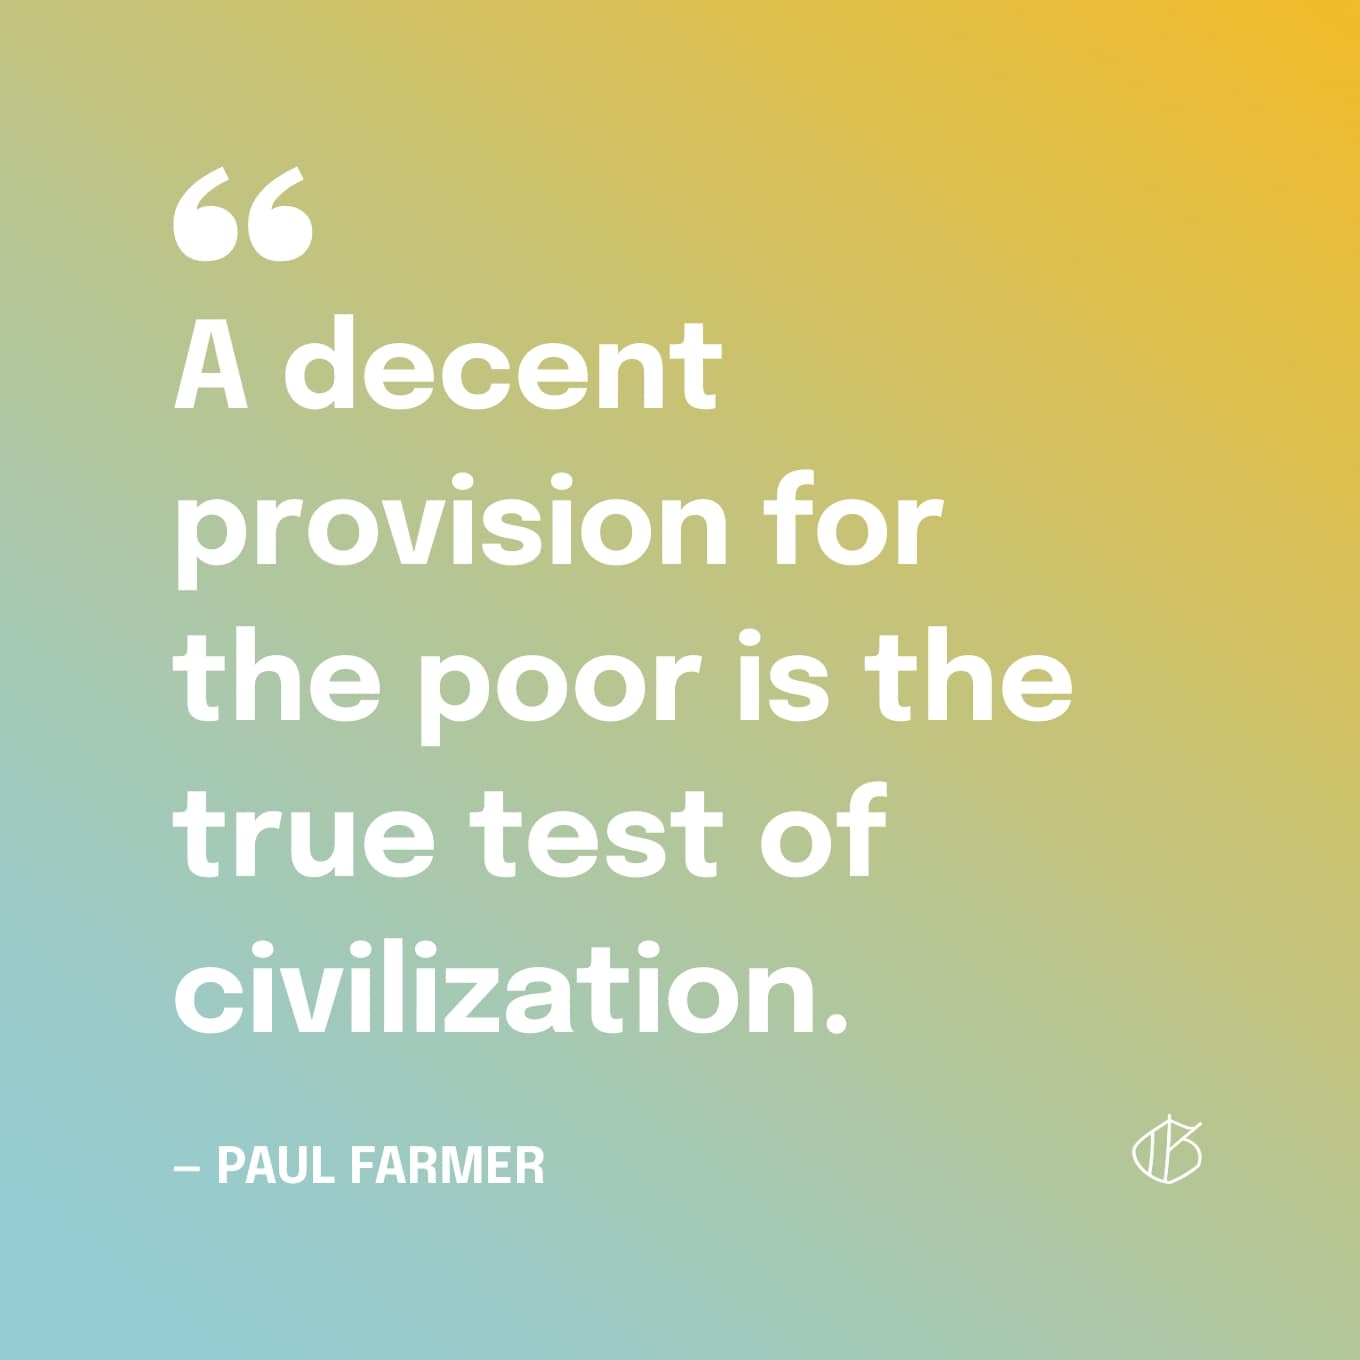 “A decent provision for the poor is the true test of civilization.” — Paul Farmer